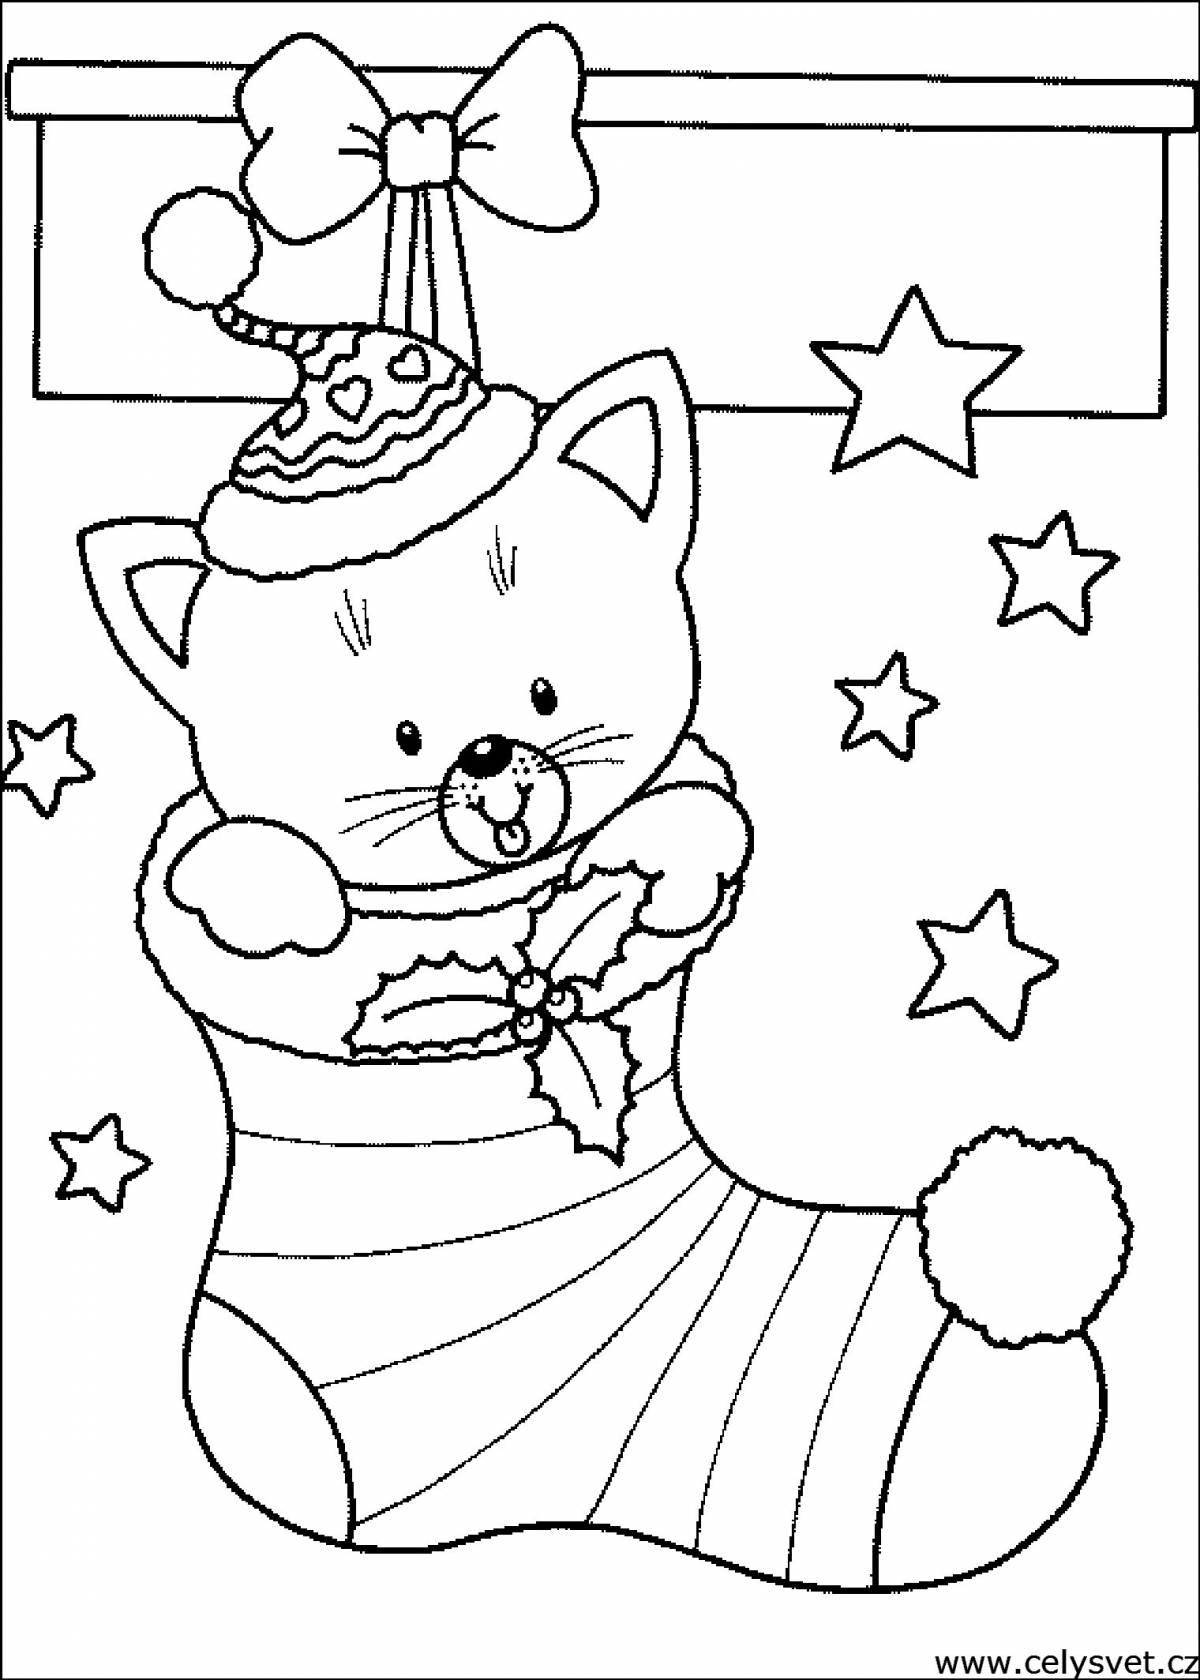 Exciting new year 9 years coloring book